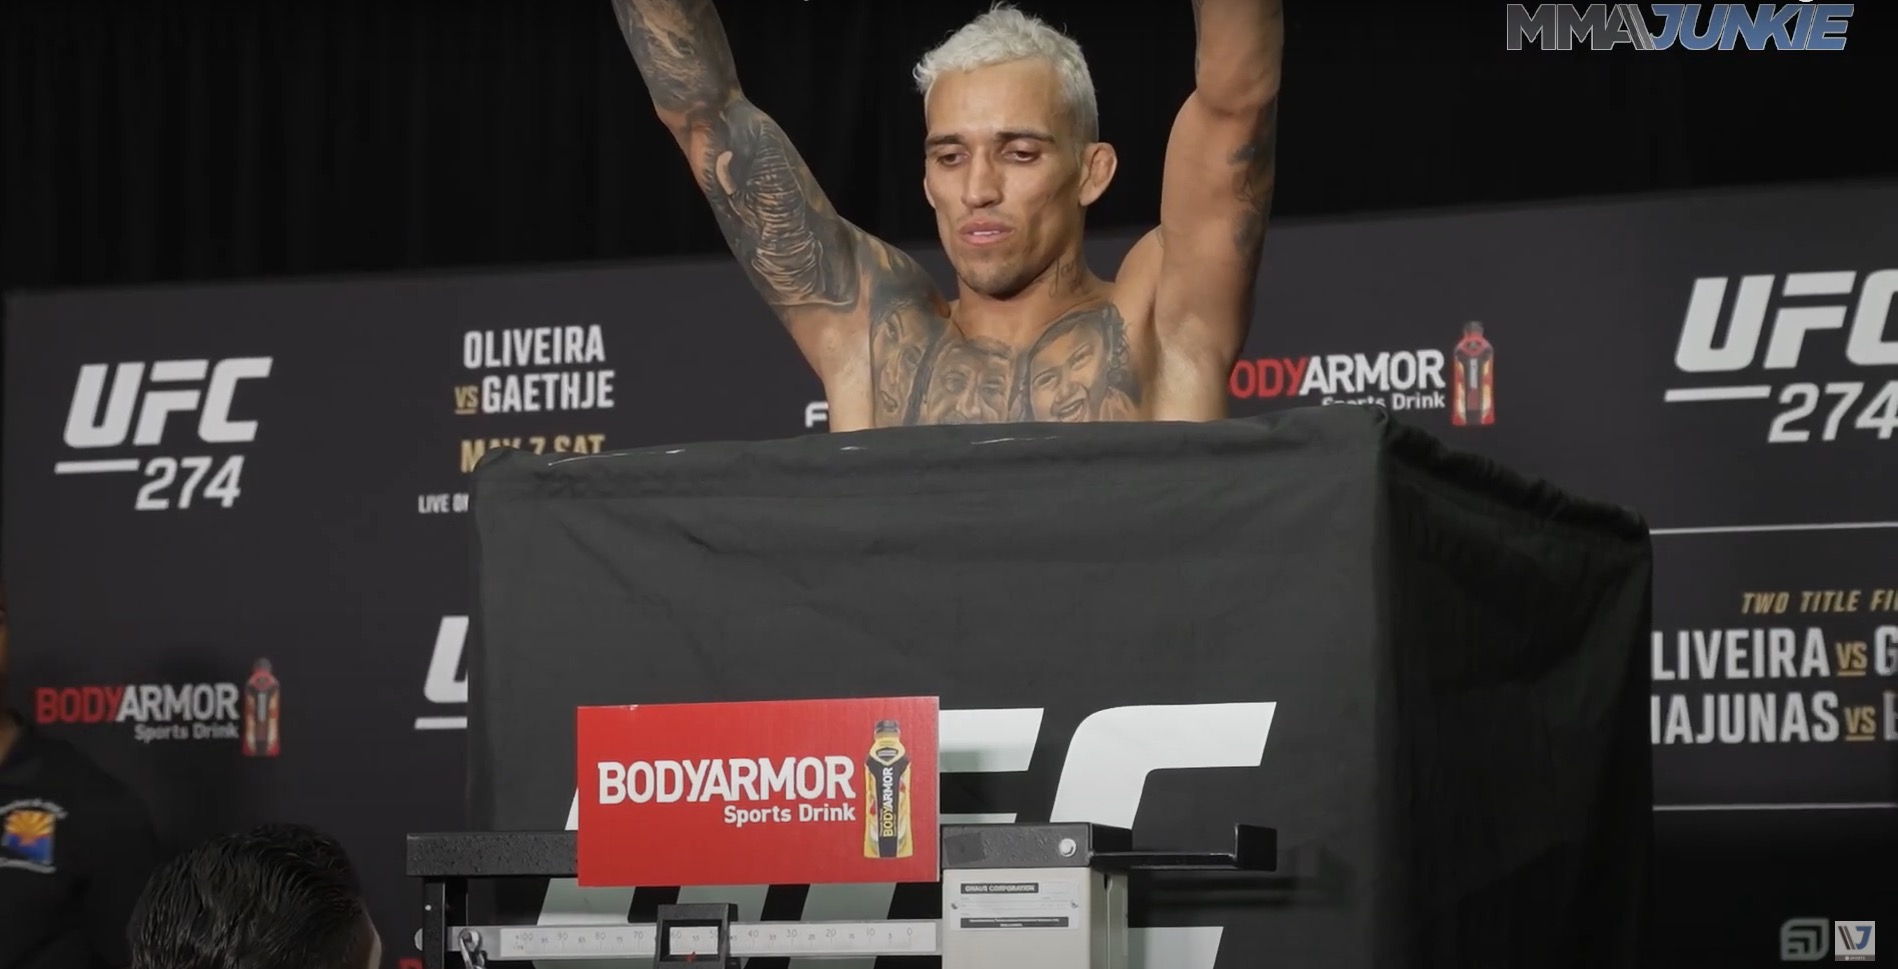 Charles Oliveira misses weight for the first time.